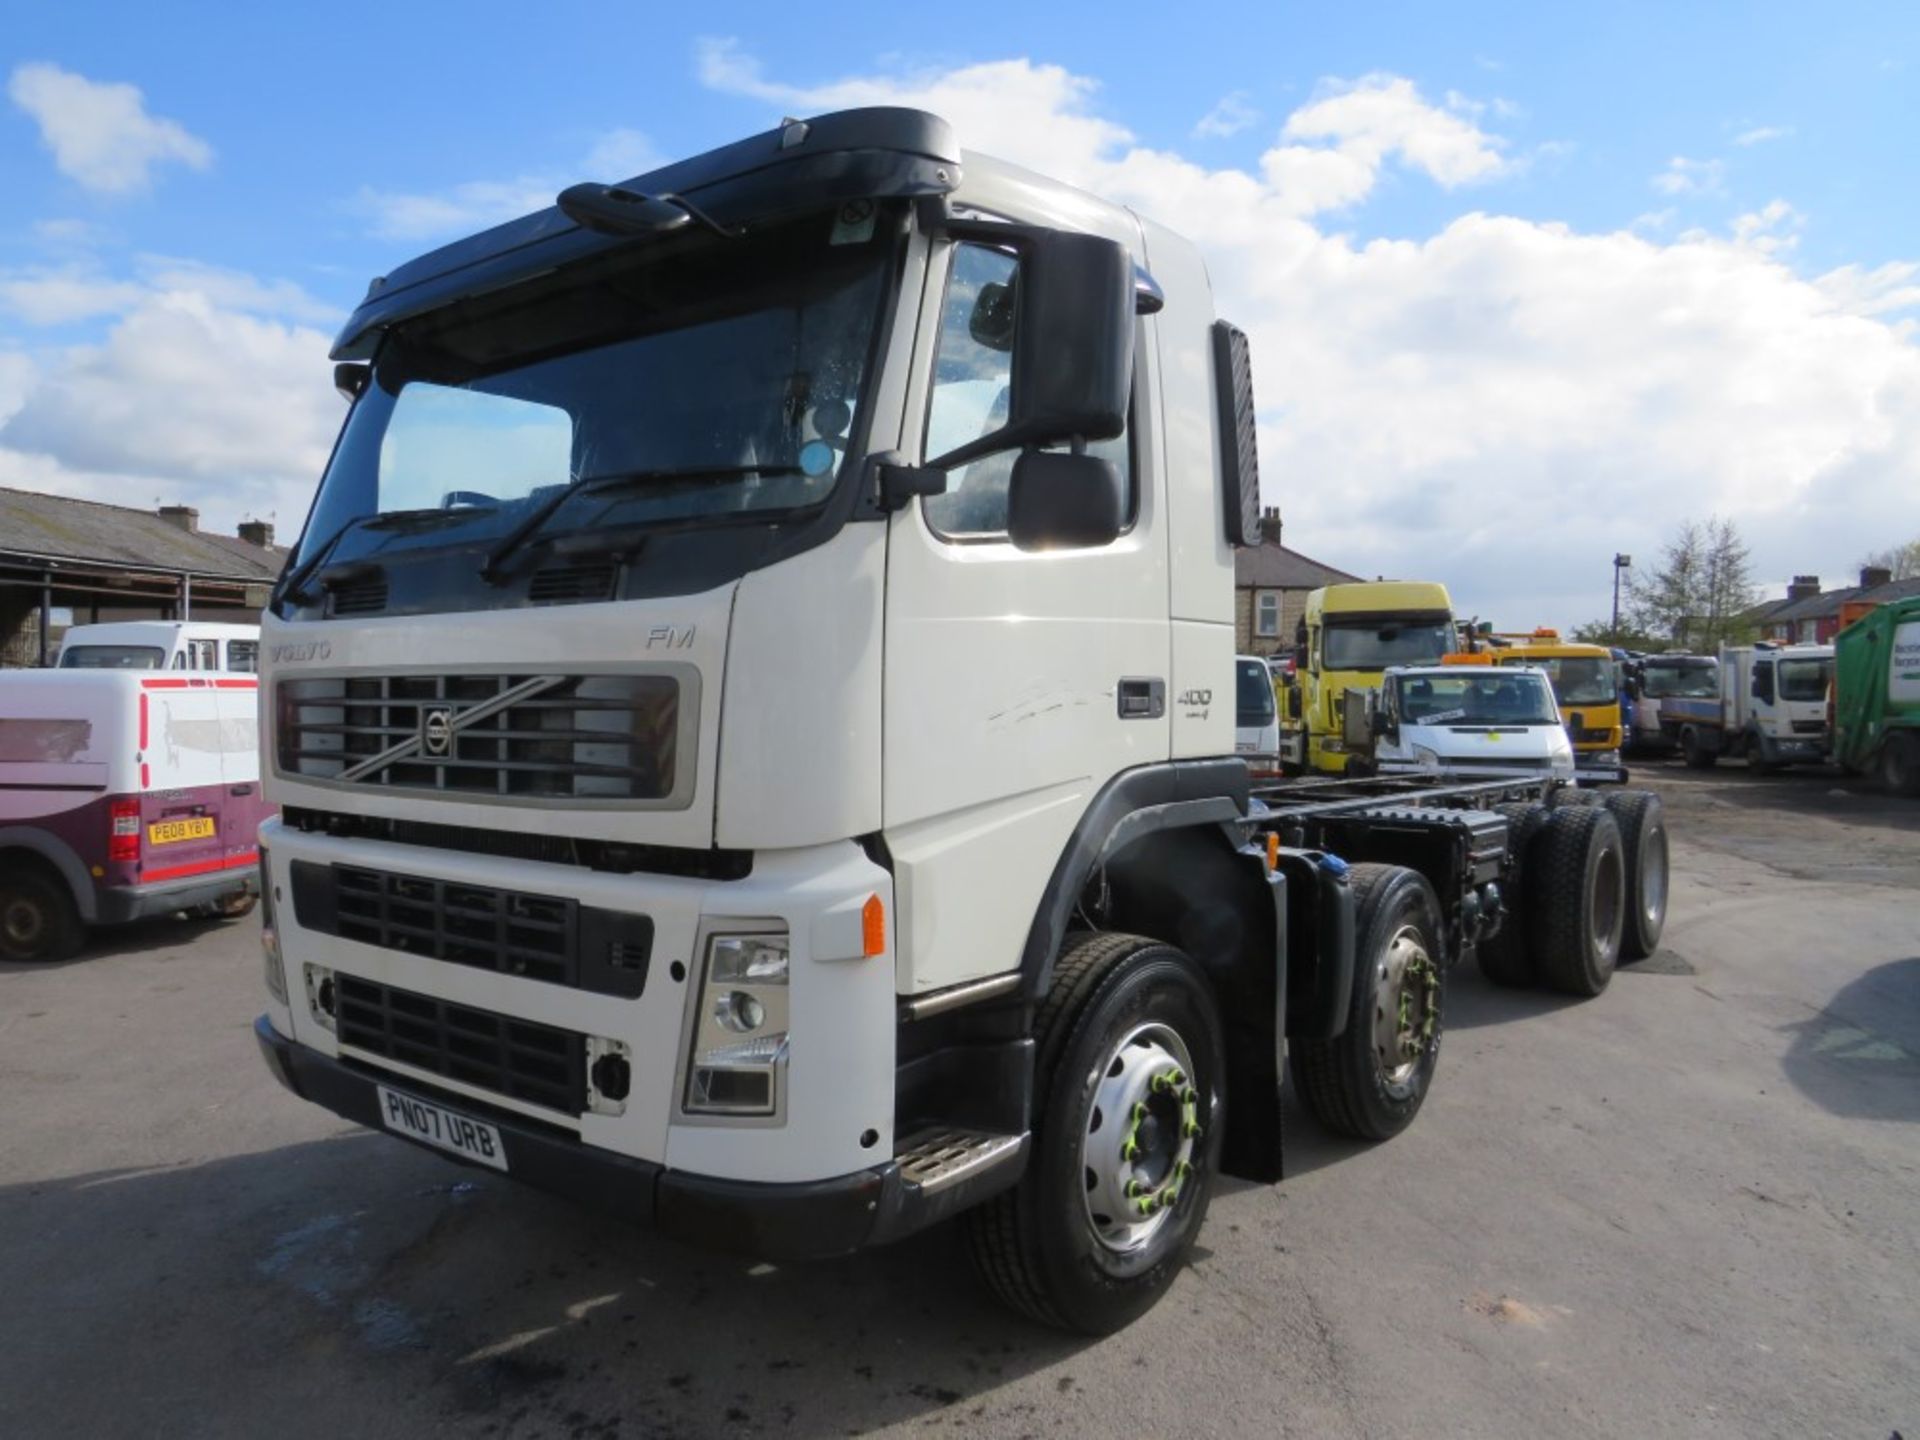 07 reg VOLVO FM400 CHASSIS CAB (DIRECT UNITED UTILITIES WATER) 1ST REG 08/07, TEST 10/21, - Image 2 of 6